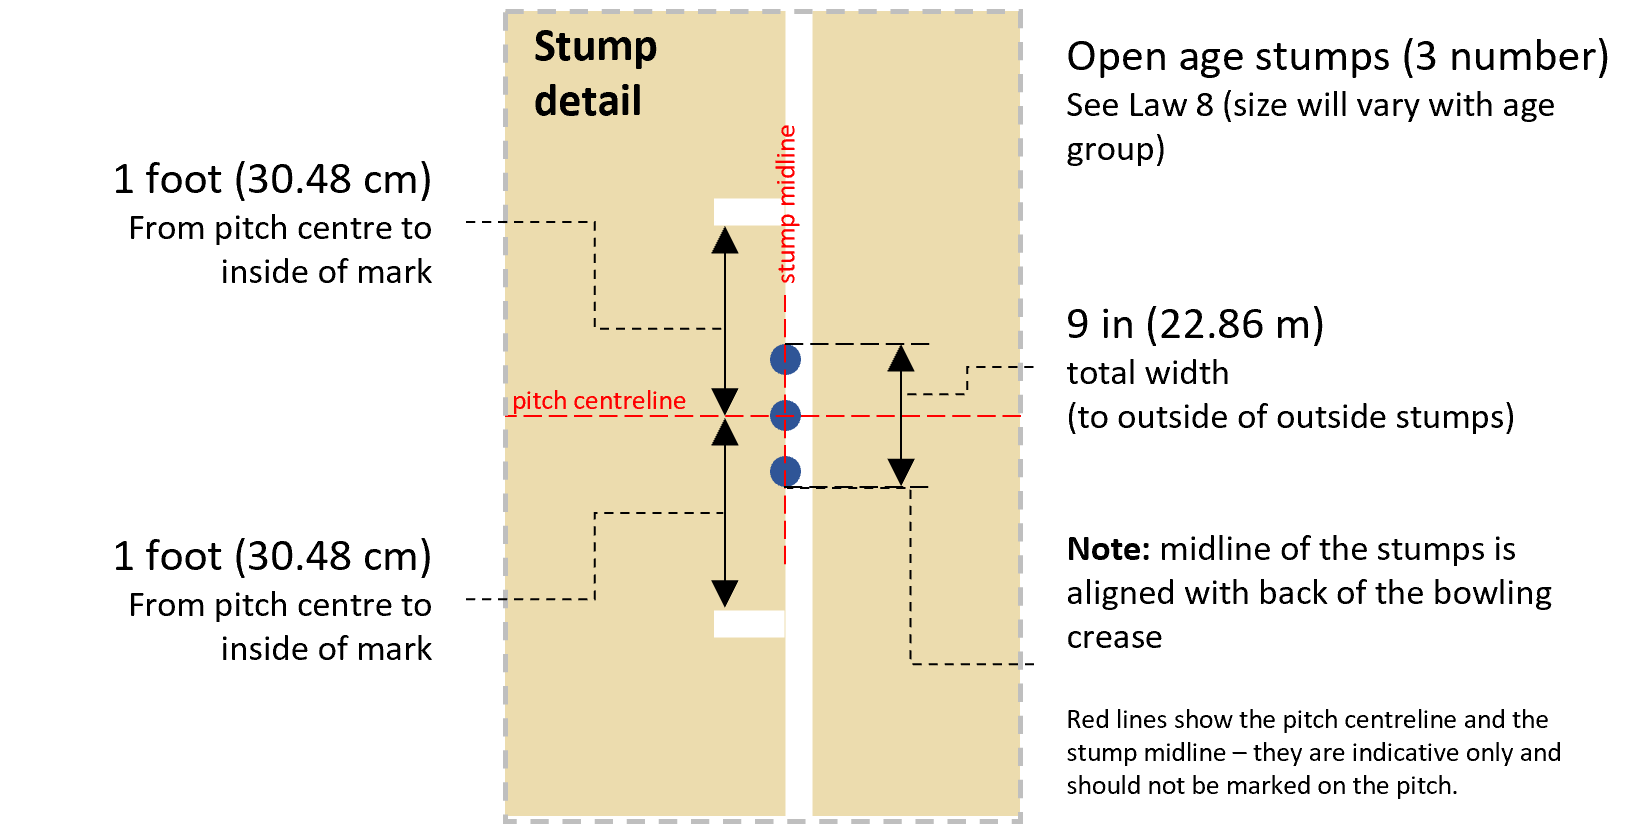 Image showing plan layout of stumps at one end of a cricket pitch with spacings and alignment